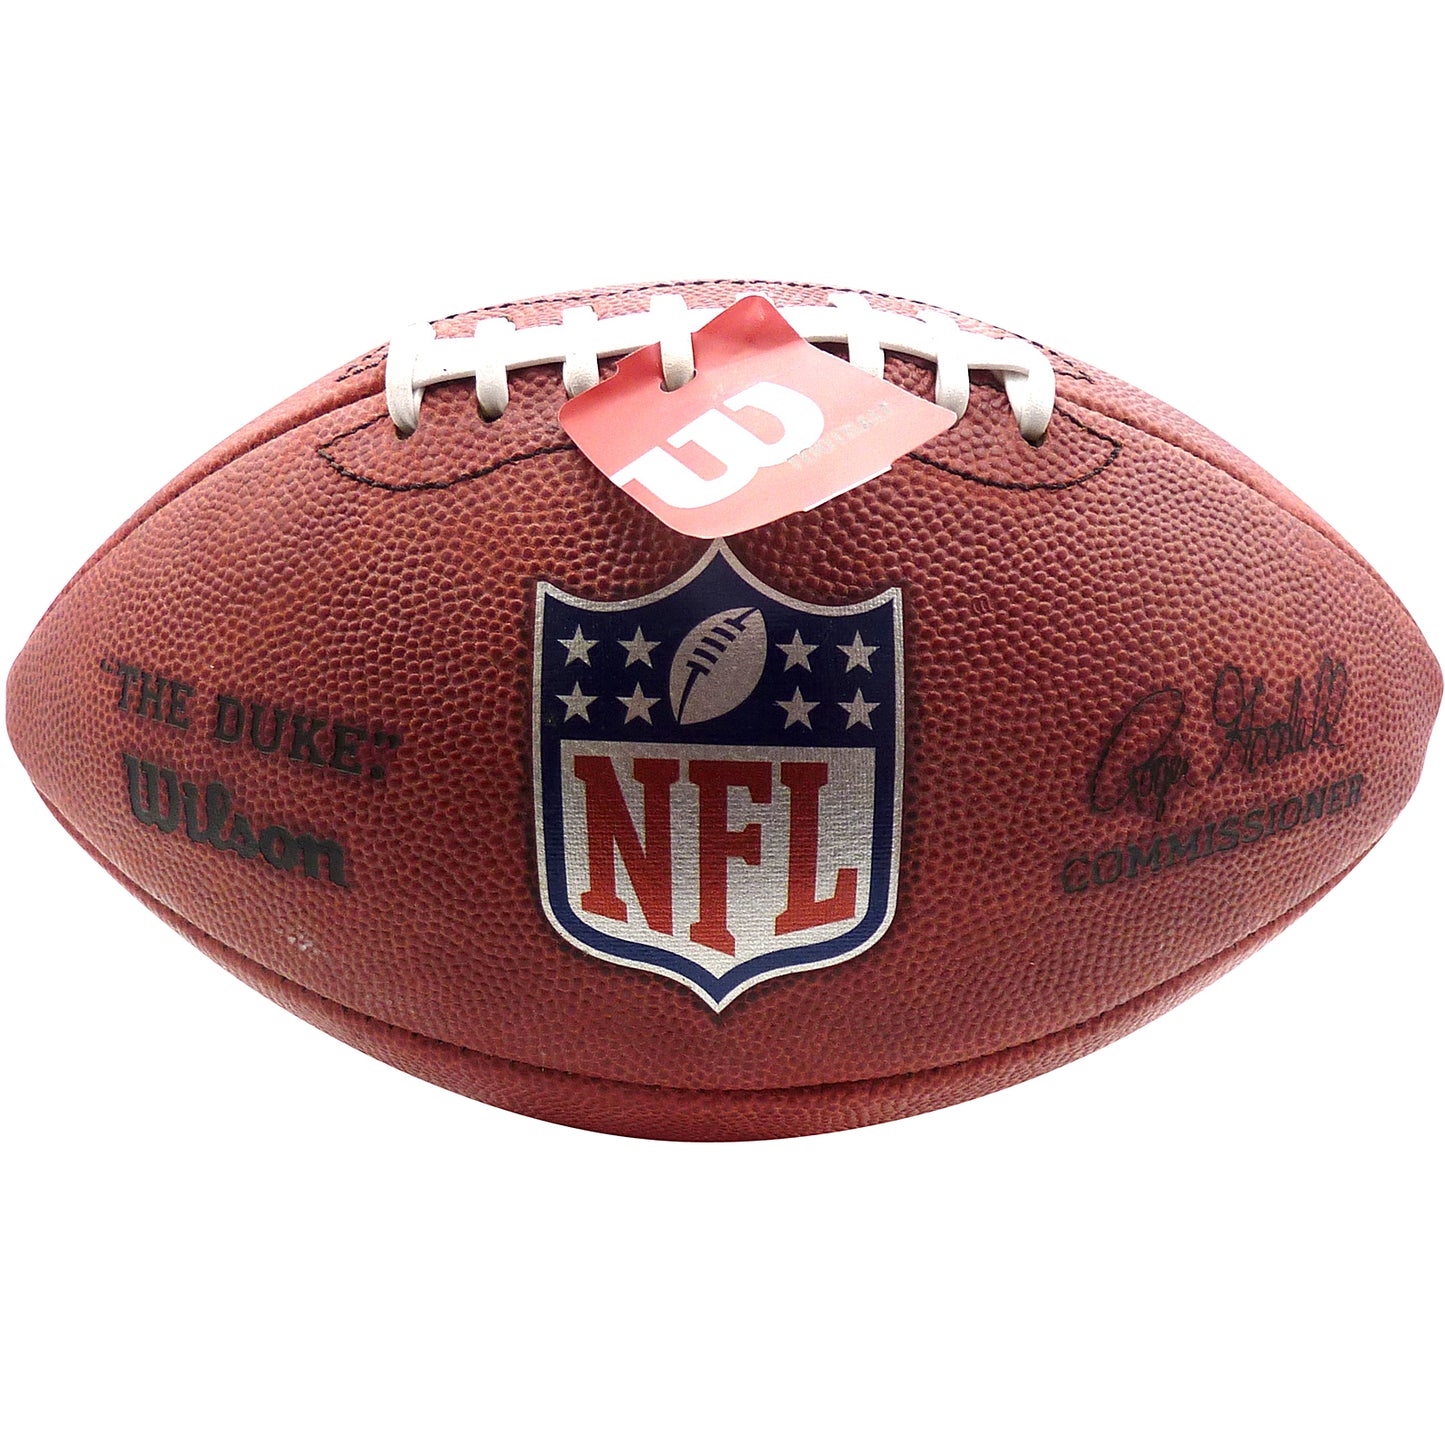 Patrick Mahomes And Travis Kelce Autographed Official NFL Game Football Kansas City Chiefs - Beckett